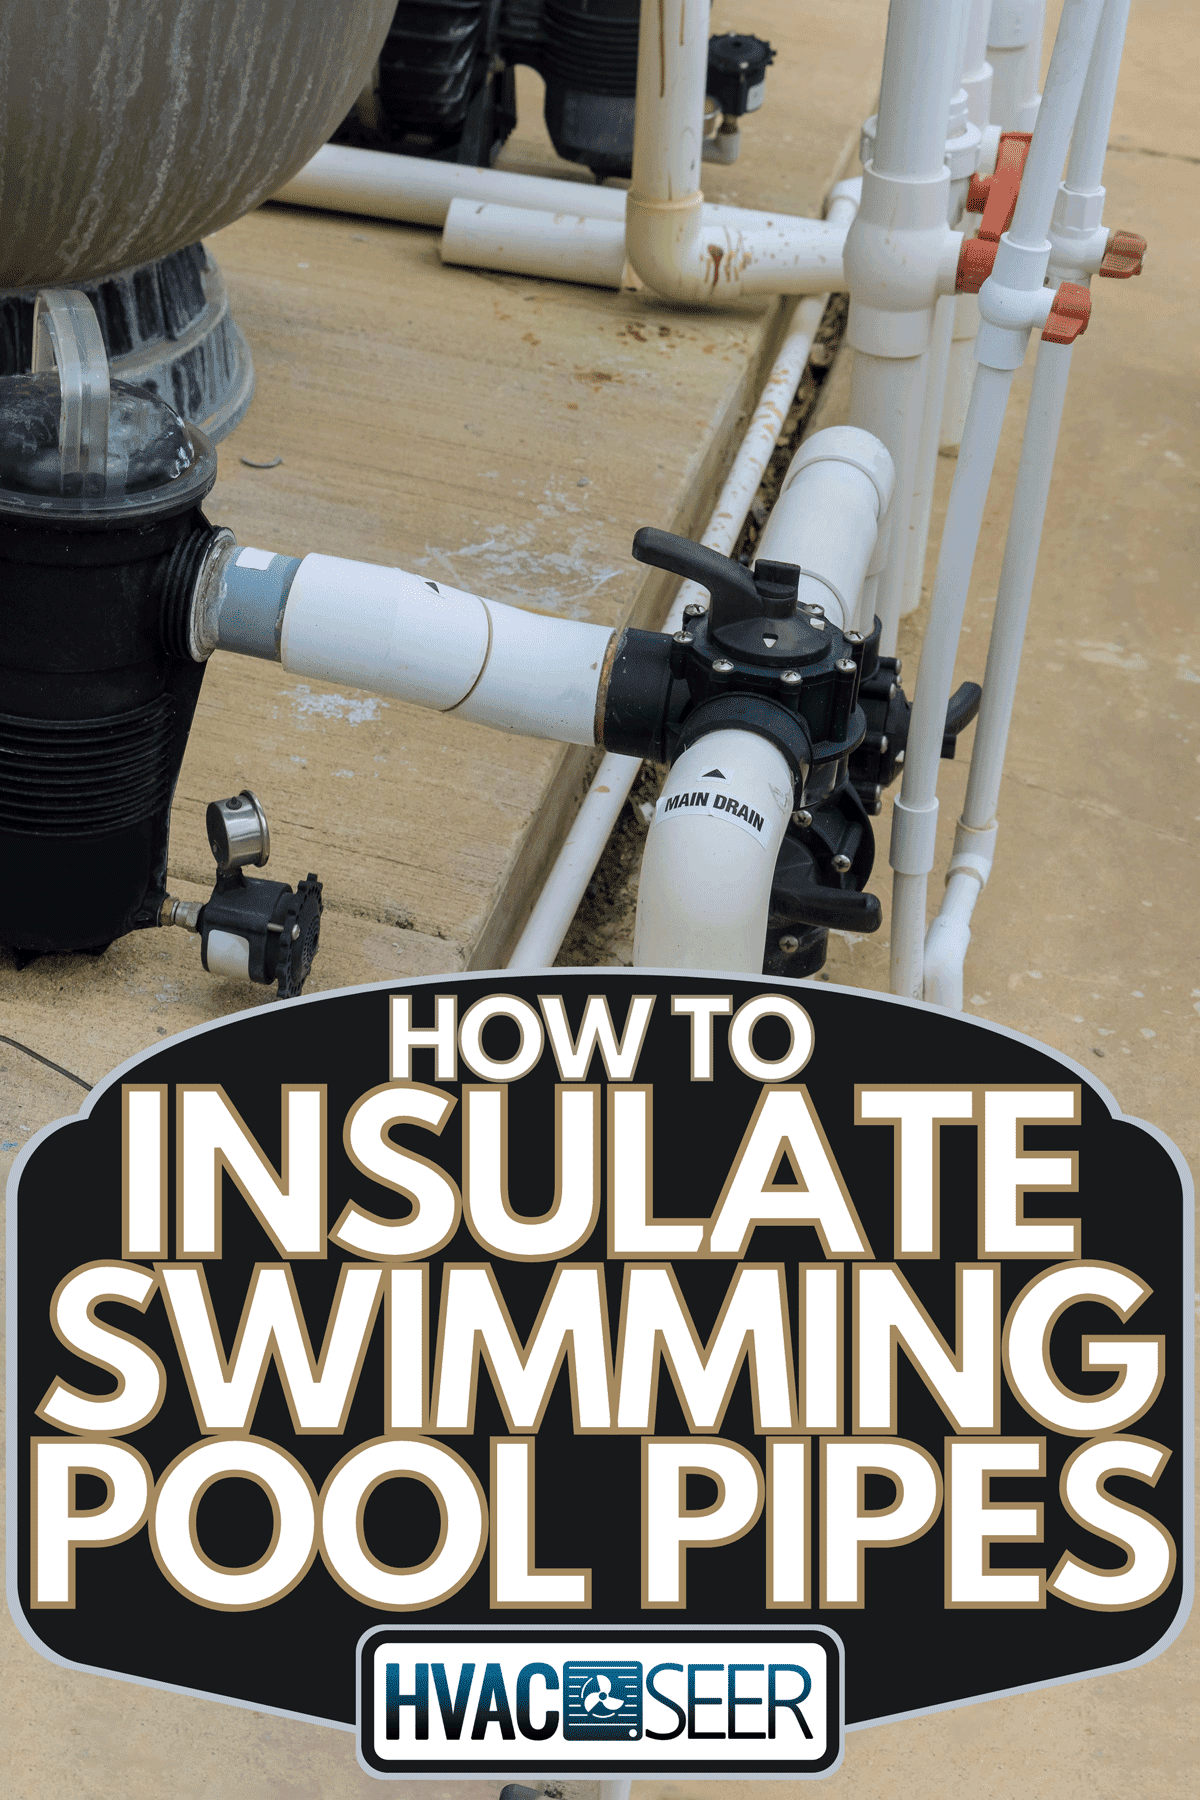 Filter system for purifying swimming pool water, How To Insulate Swimming Pool Pipes